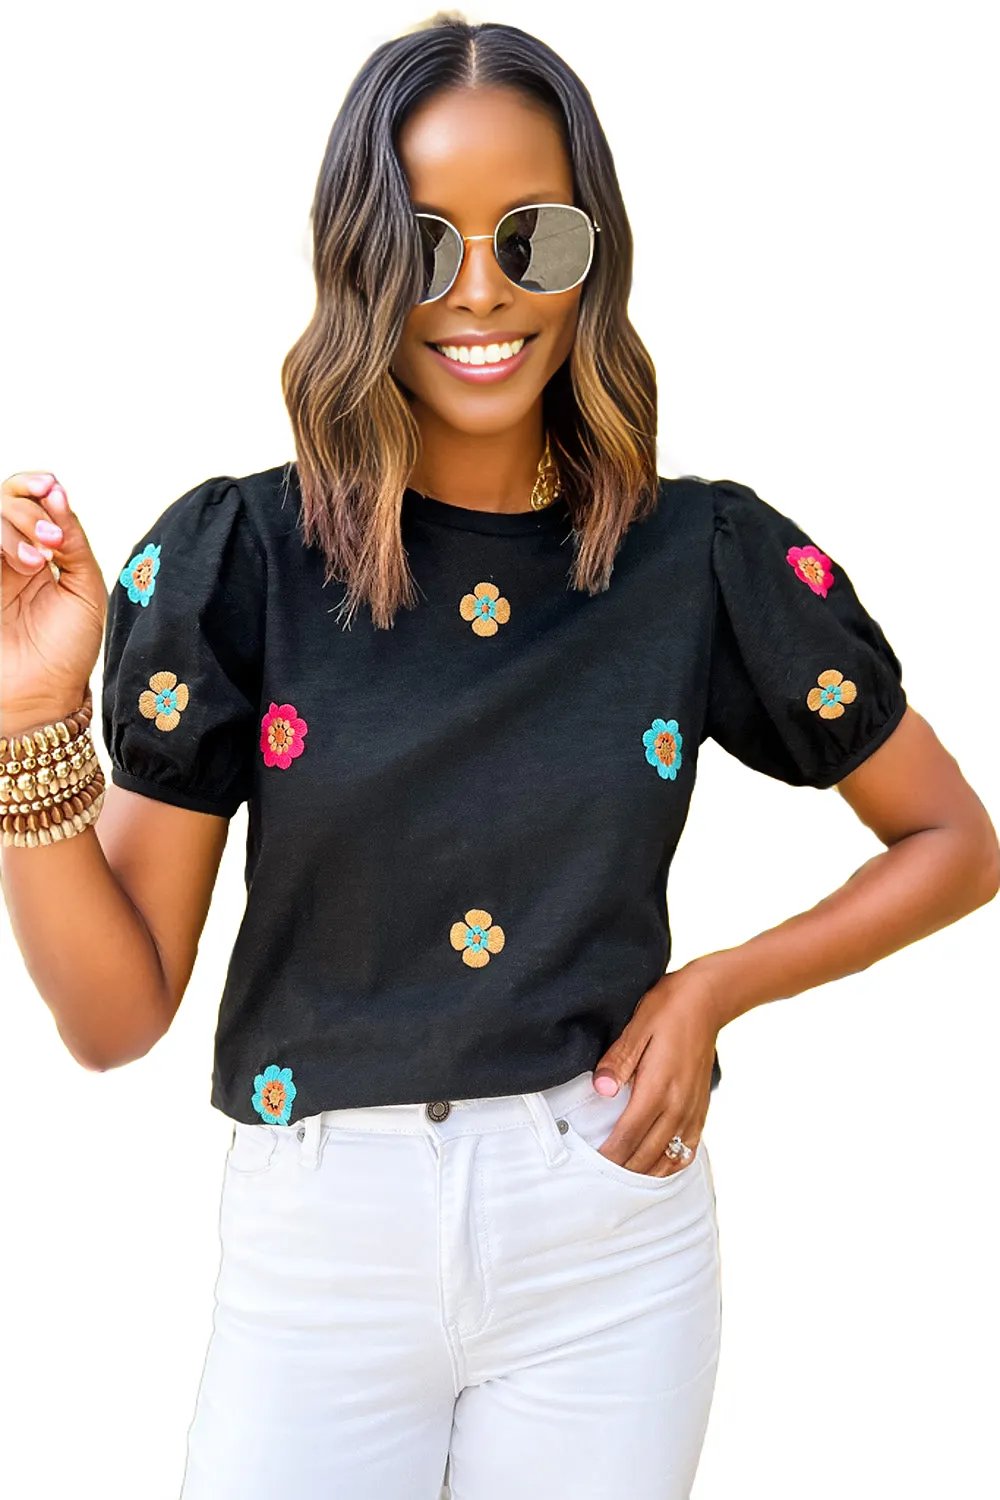 Black Embroidered Flower Short Puff Sleeve Tee - Shop Women's Stylish T-shirts at TFC&H Co.